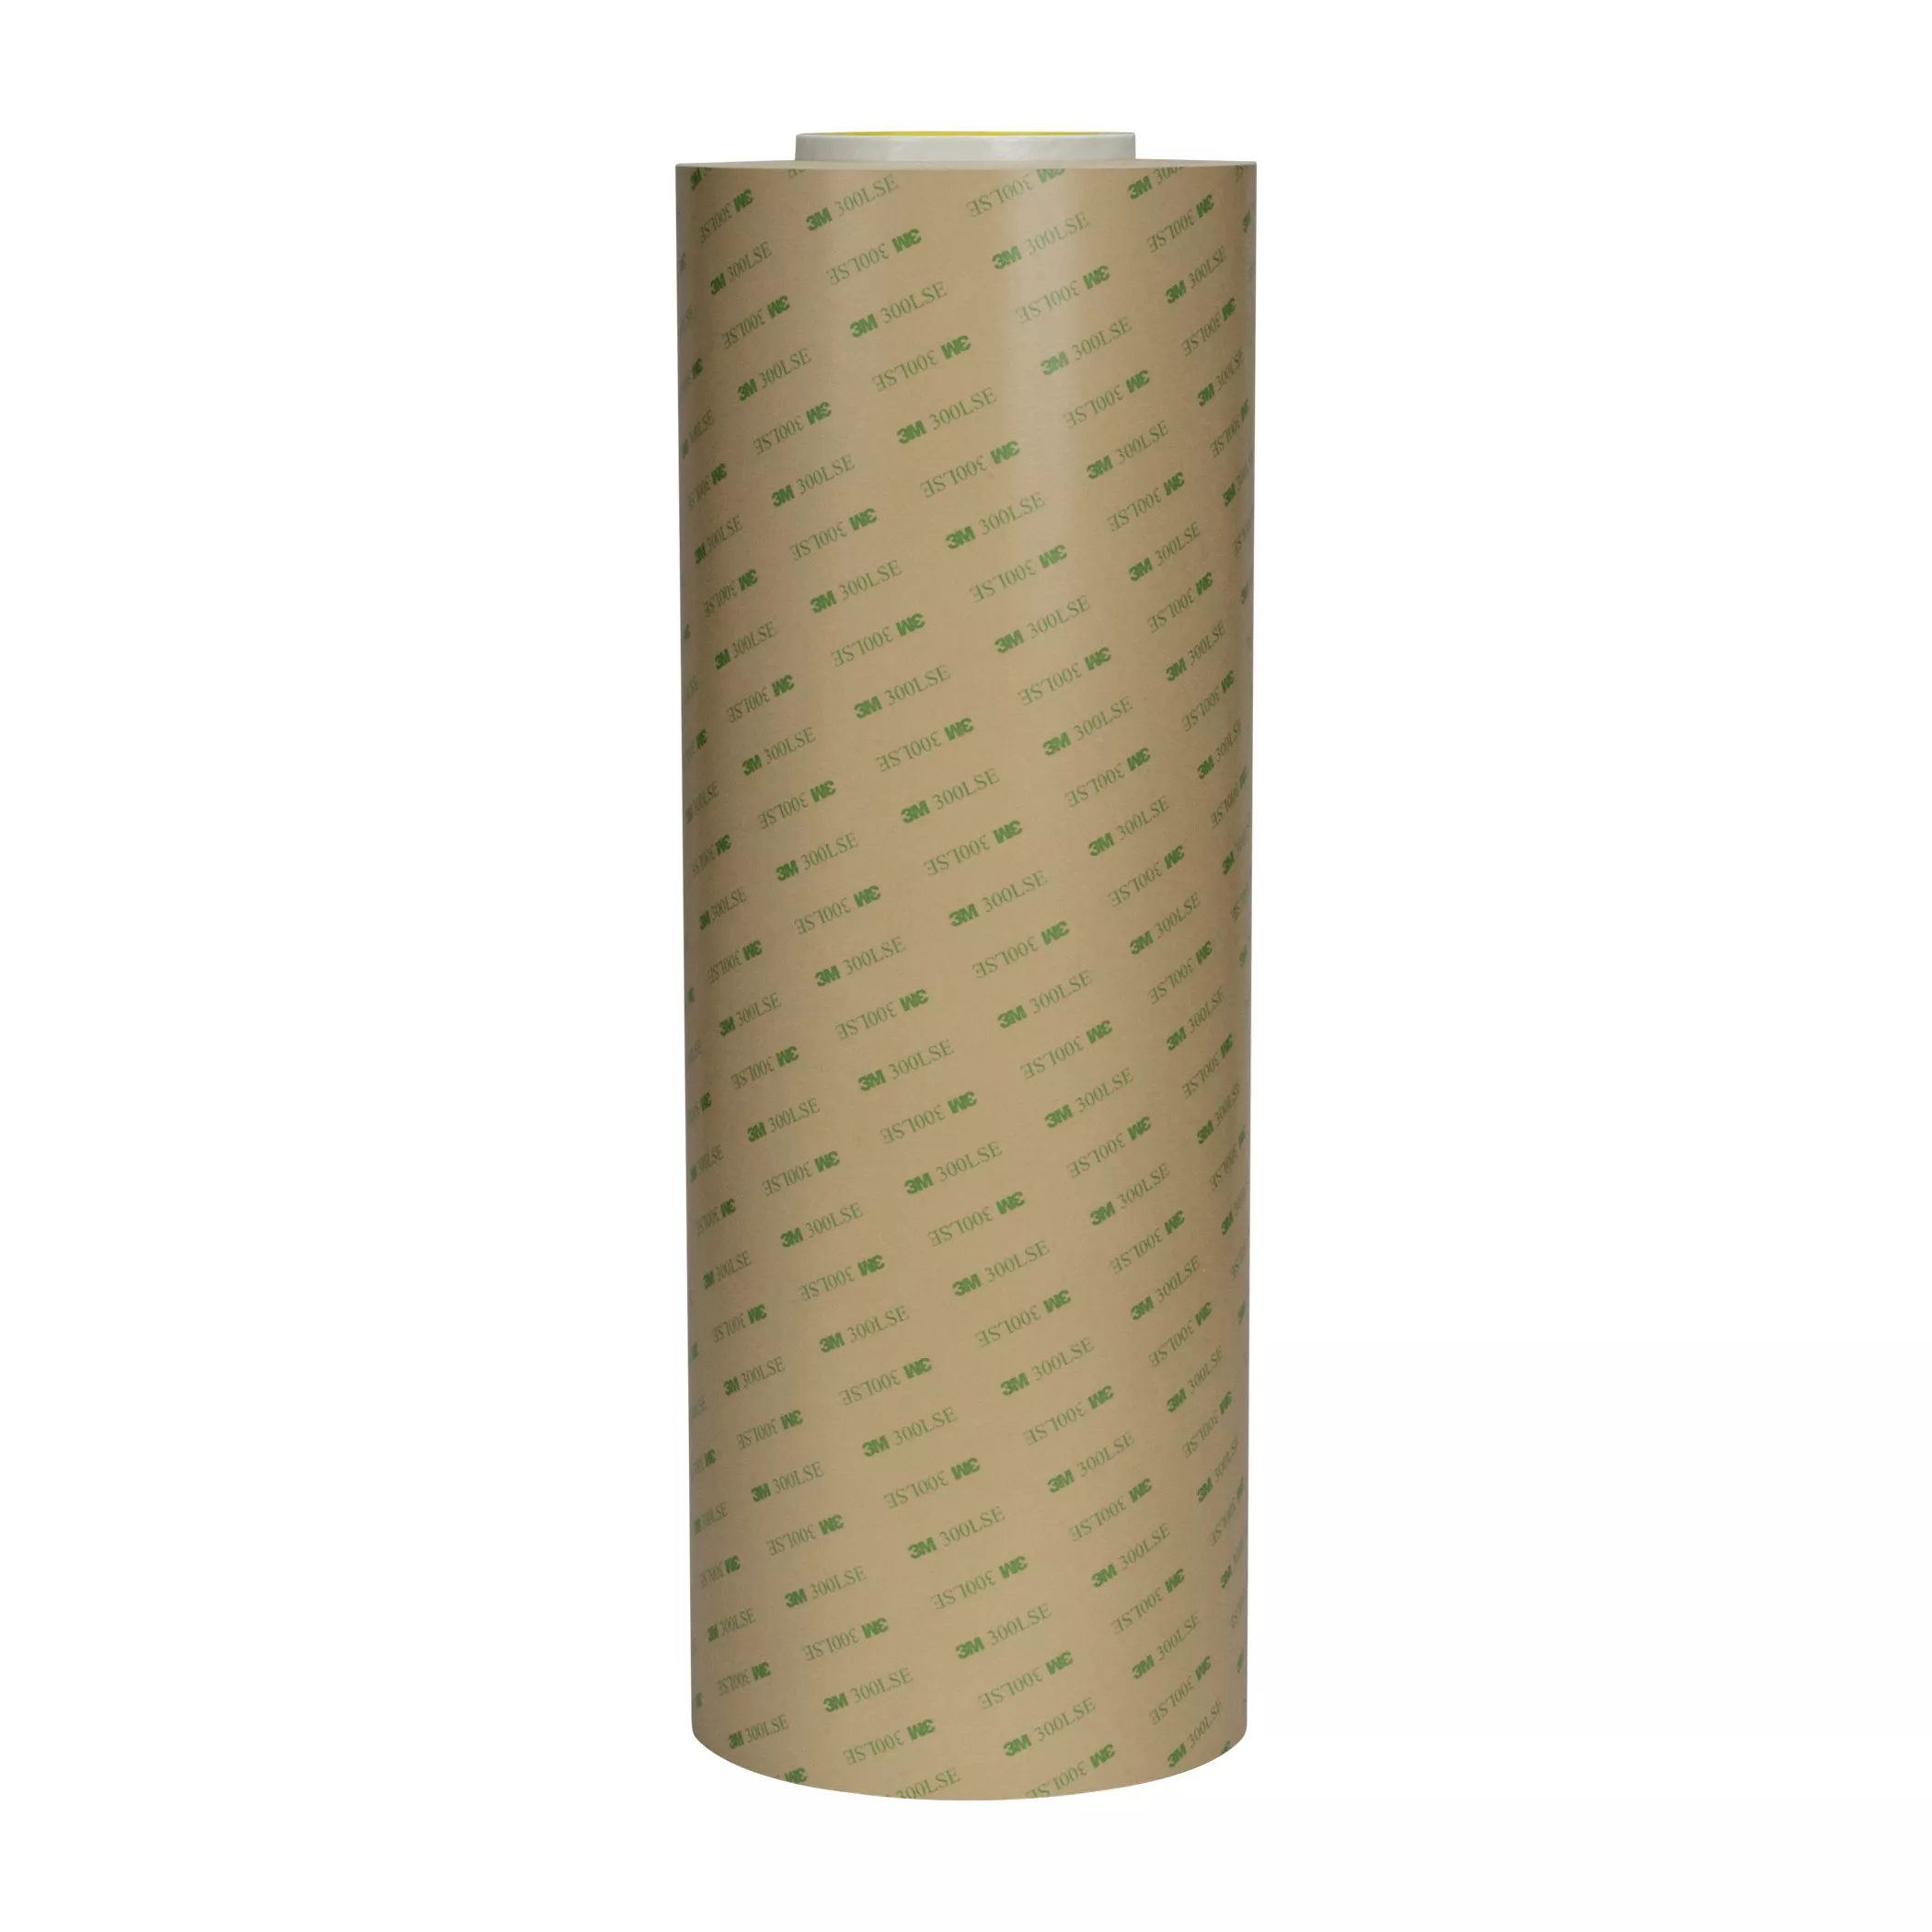 3M™ Adhesive Transfer Tape 9671LE, Clear, 54 in x 180 yd, 2 mil, 1
Roll/Case